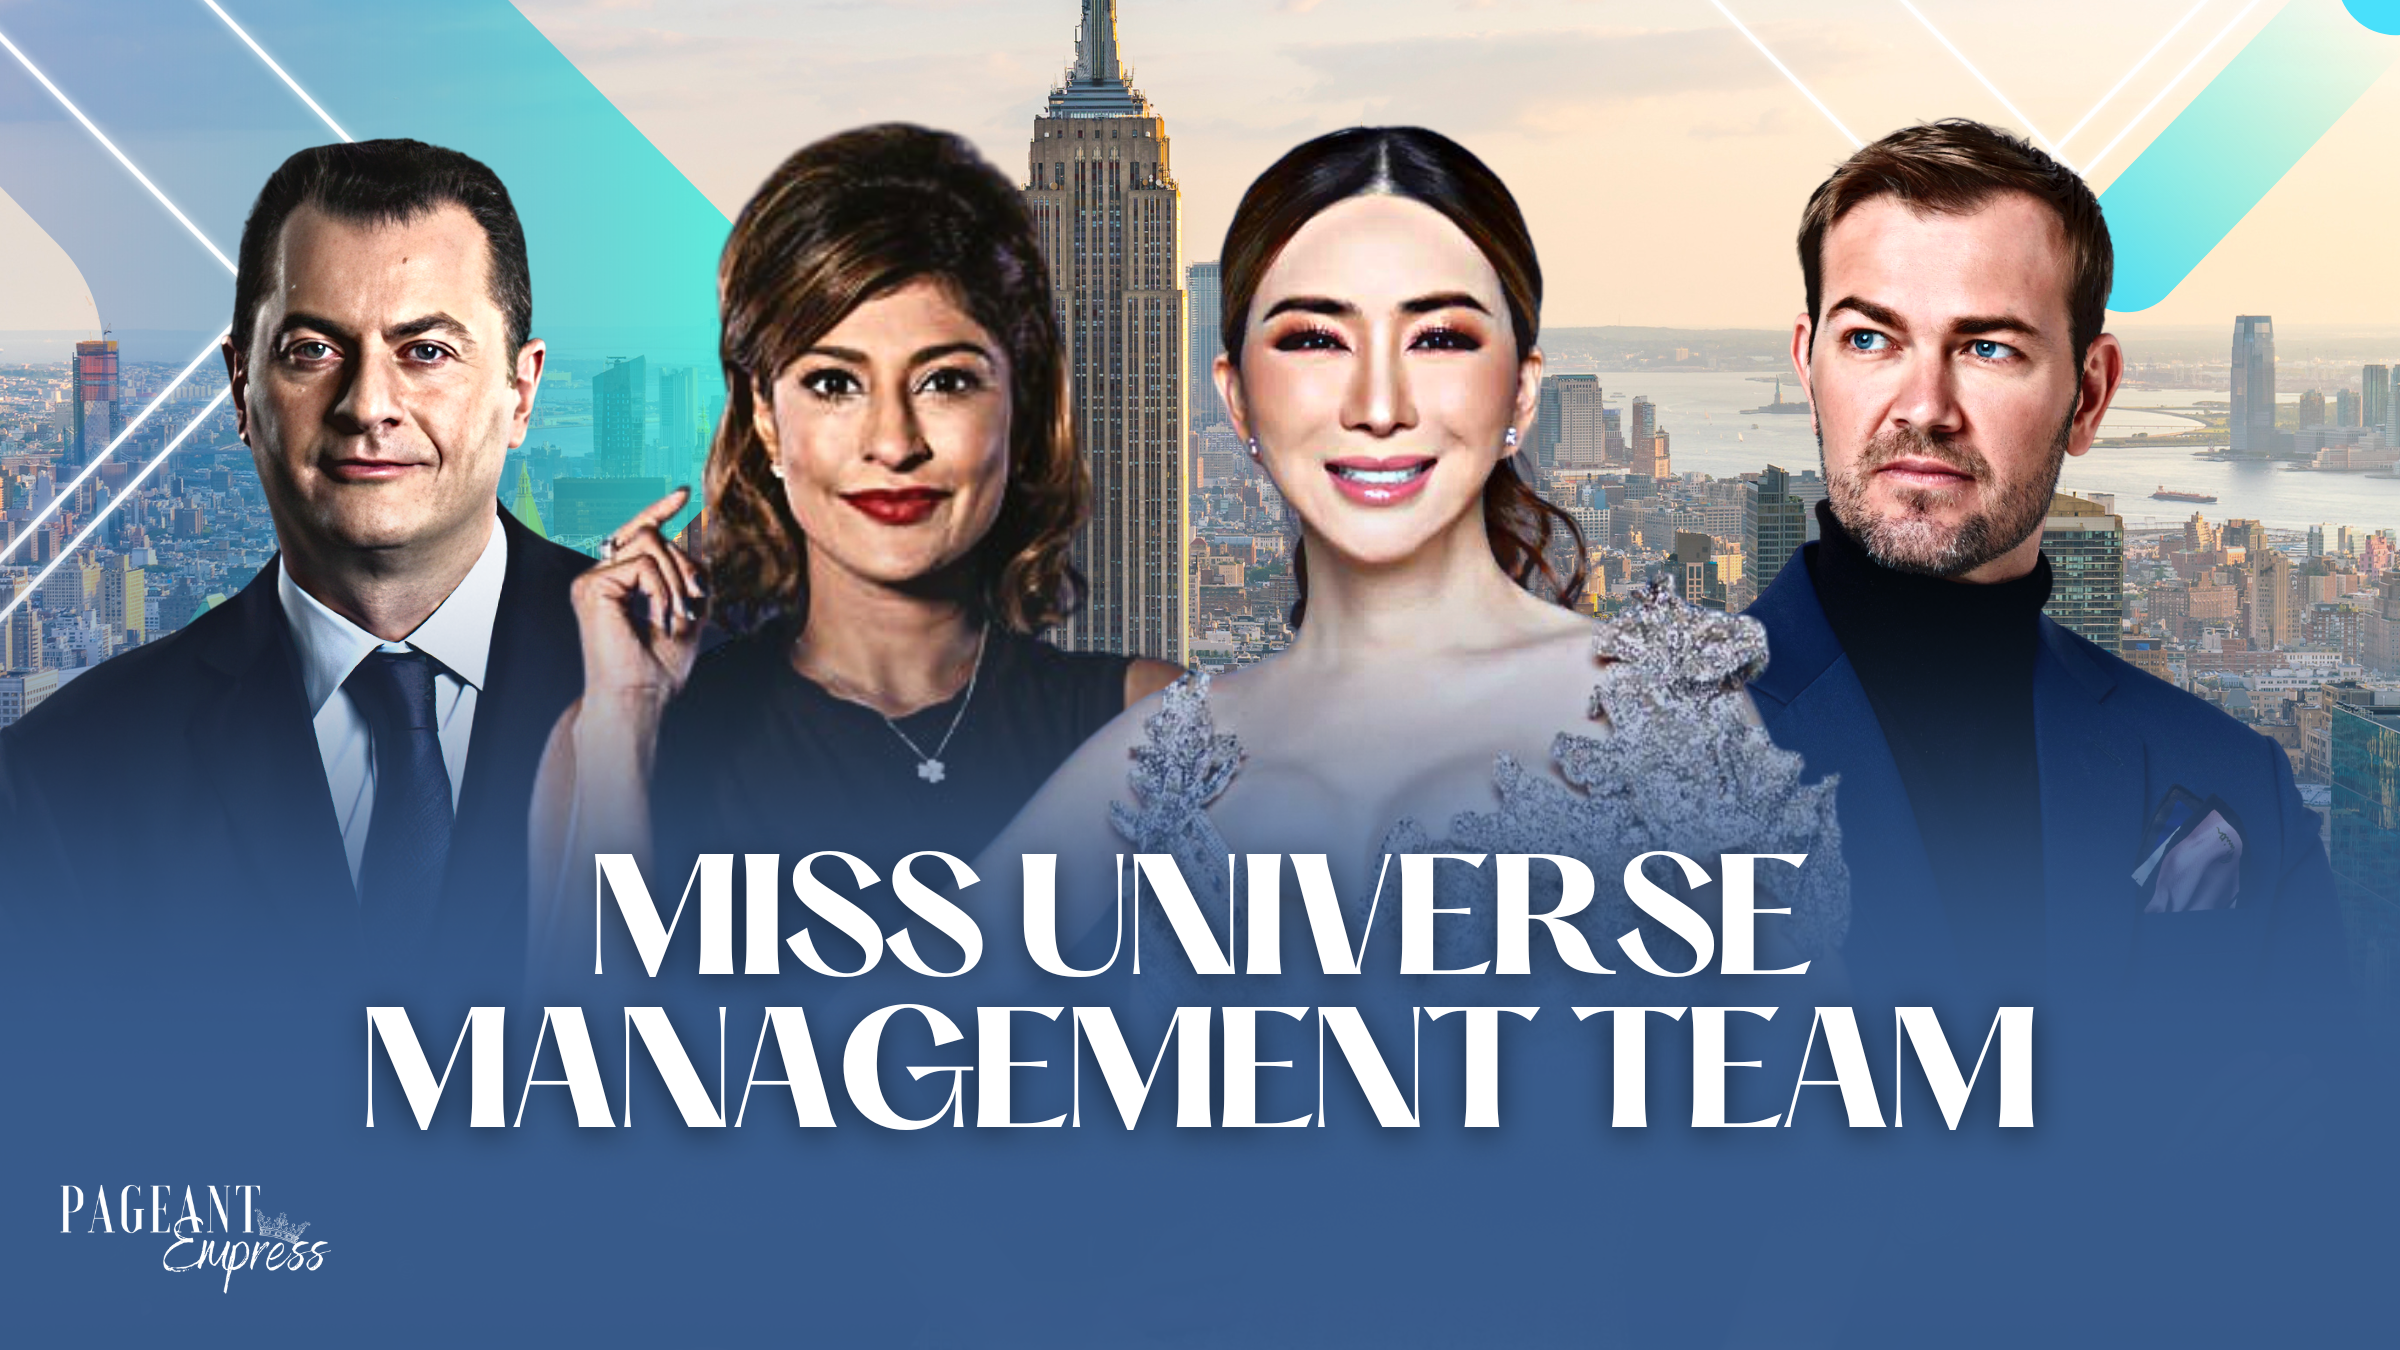 Introducing the Miss Universe Management Team